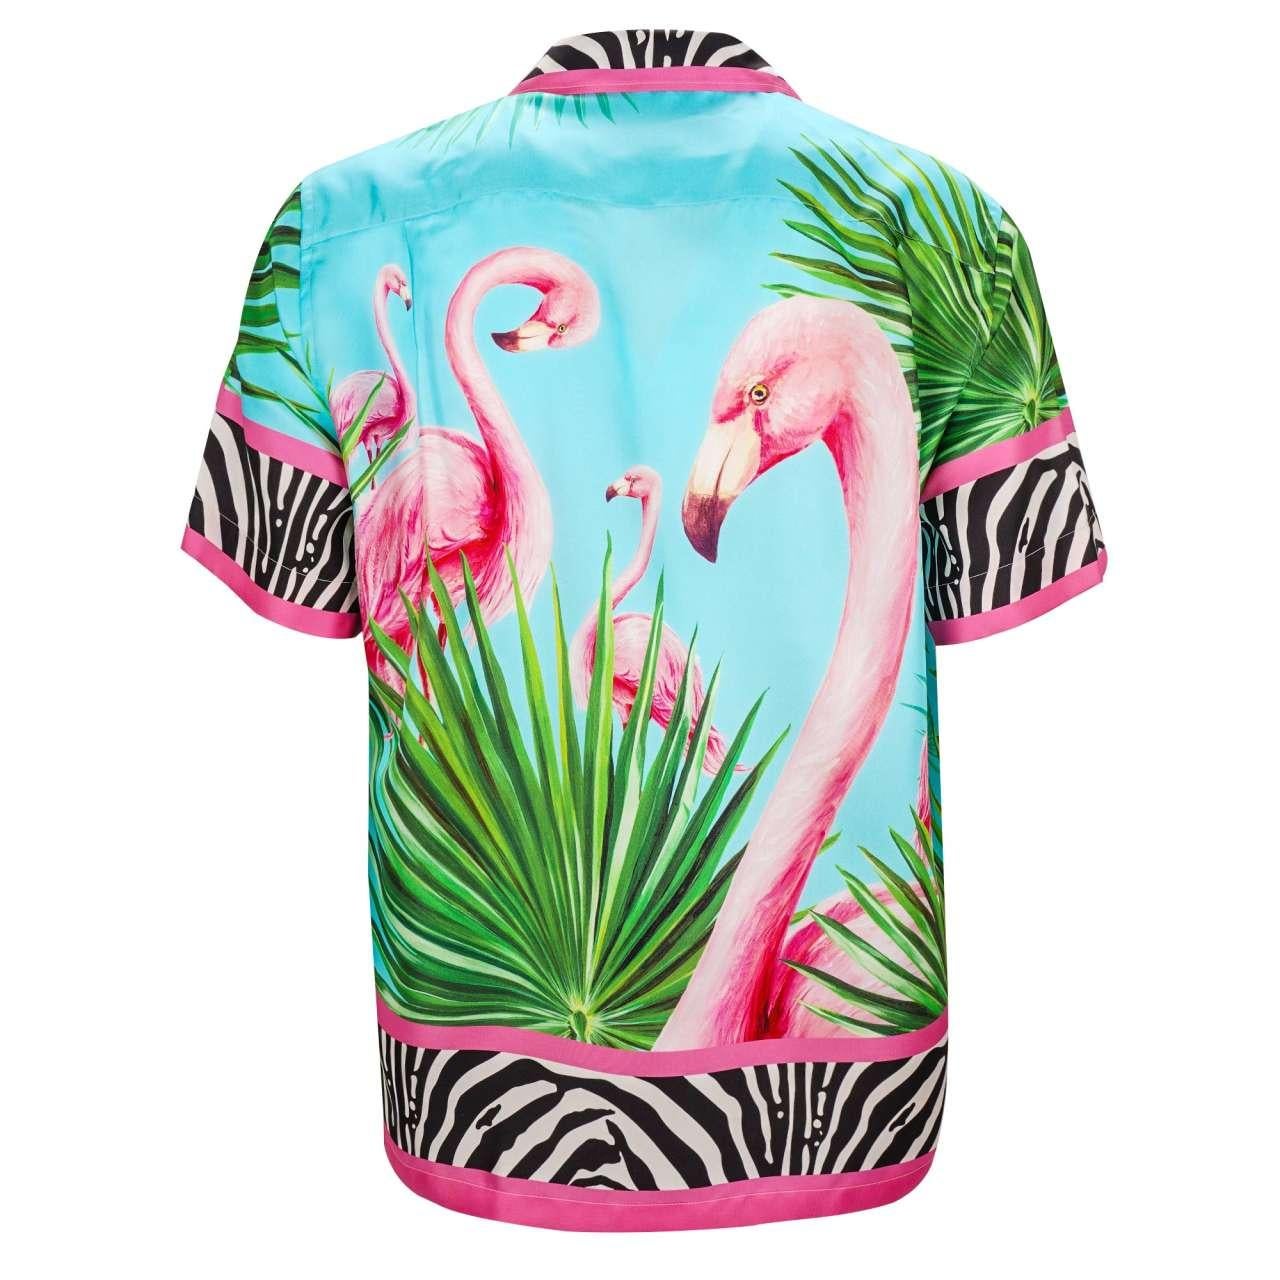 Dolce & Gabbana - DJ Khaled Silk Flamingo Zebra Shirt with Sunglasses and CD 37 In Excellent Condition For Sale In Erkrath, DE